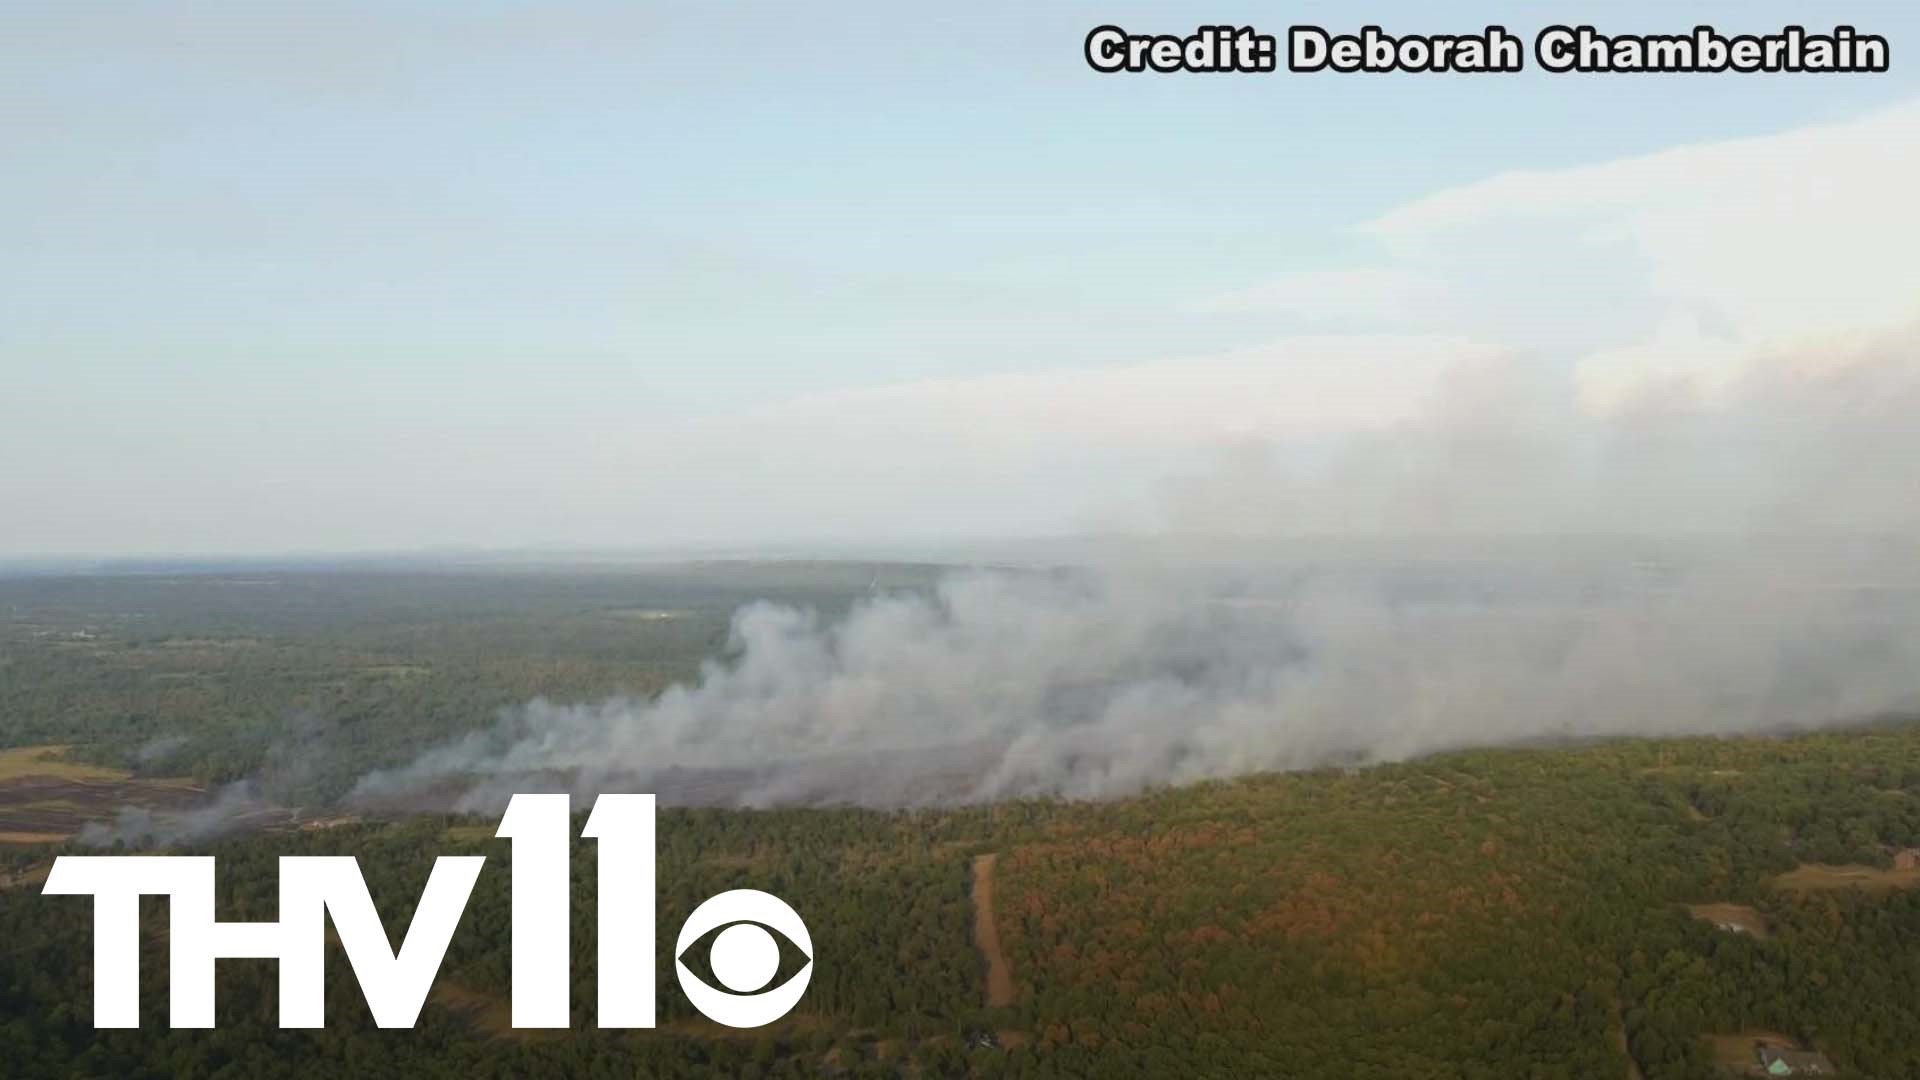 Many Arkansans were forced to evacuate as emergency crews worked to put out a grassfire that spread from Fort Chaffee to Greenwood.